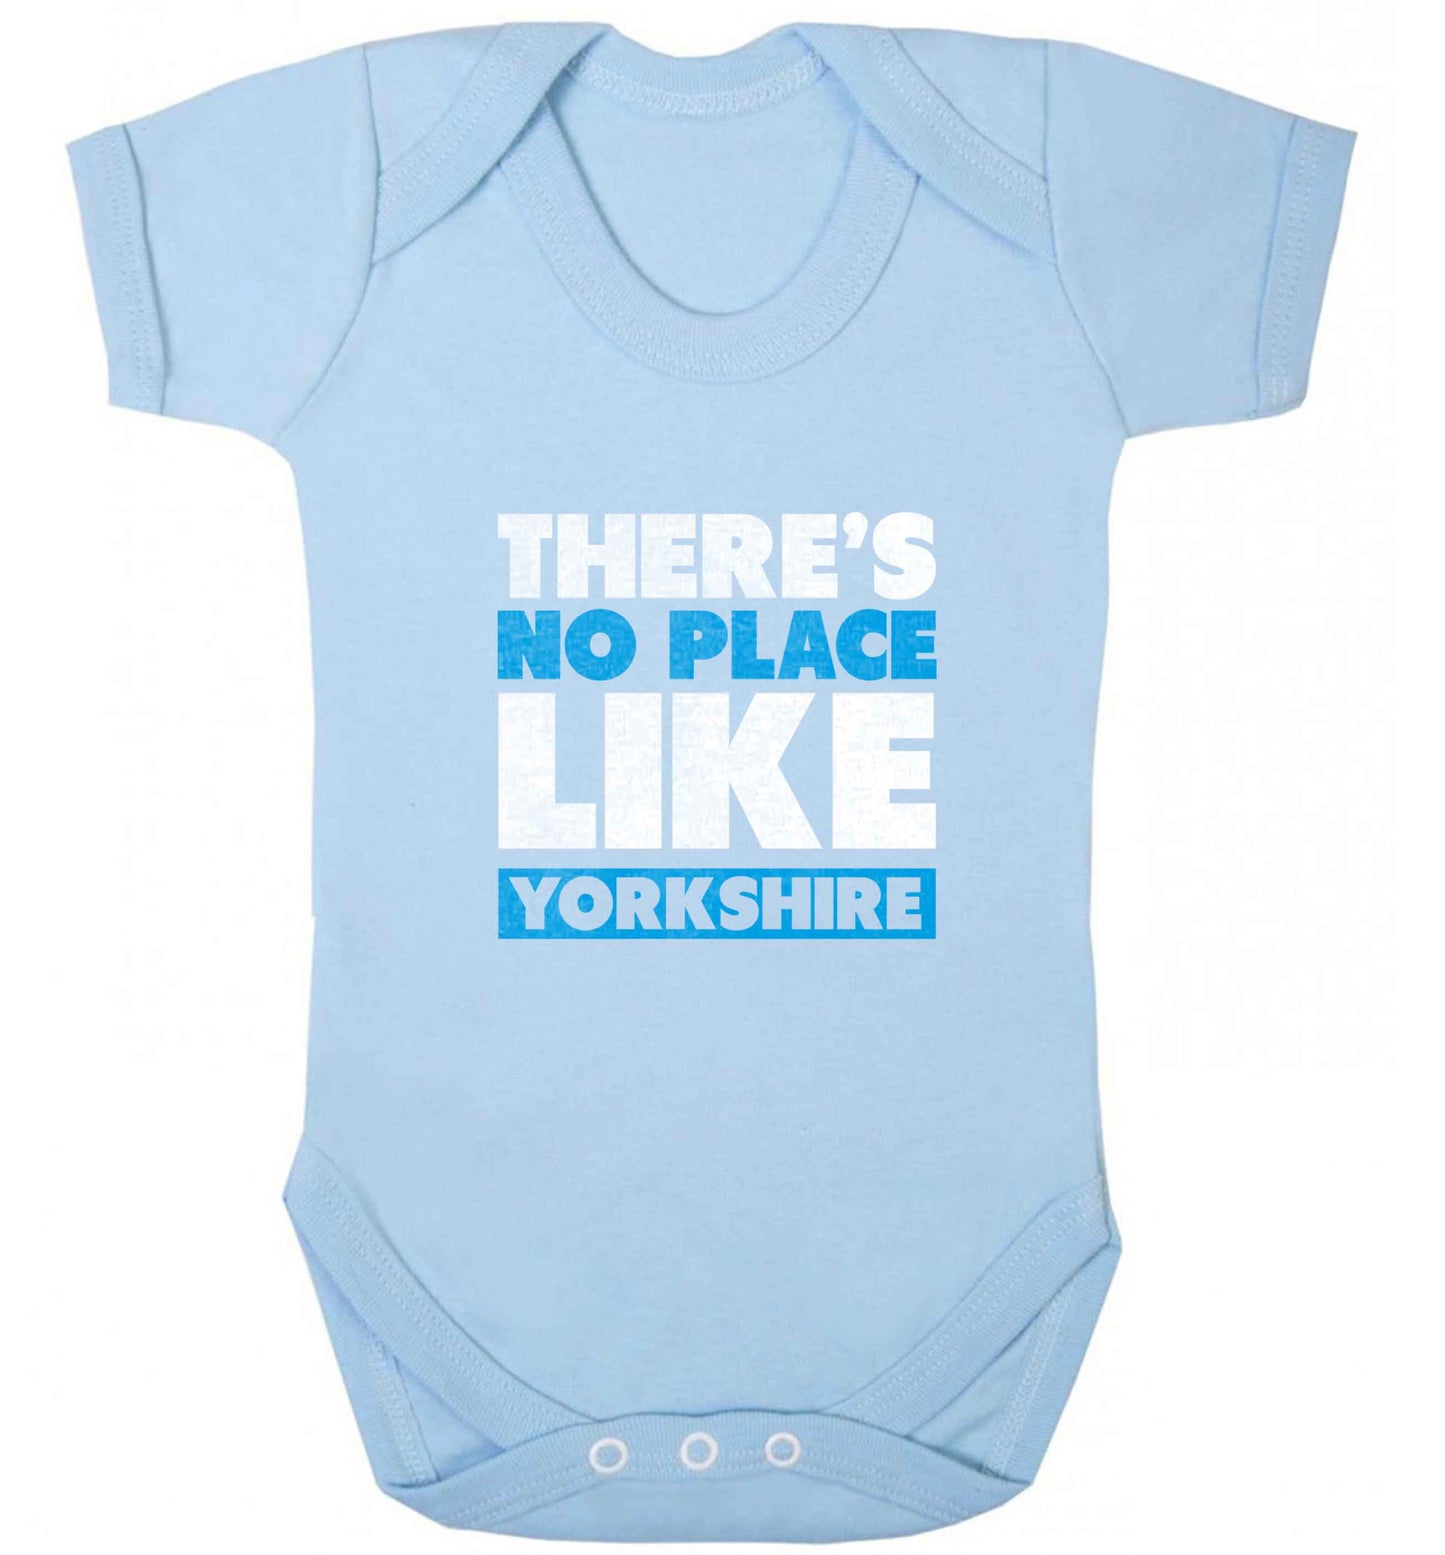 There's no place like Yorkshire baby vest pale blue 18-24 months